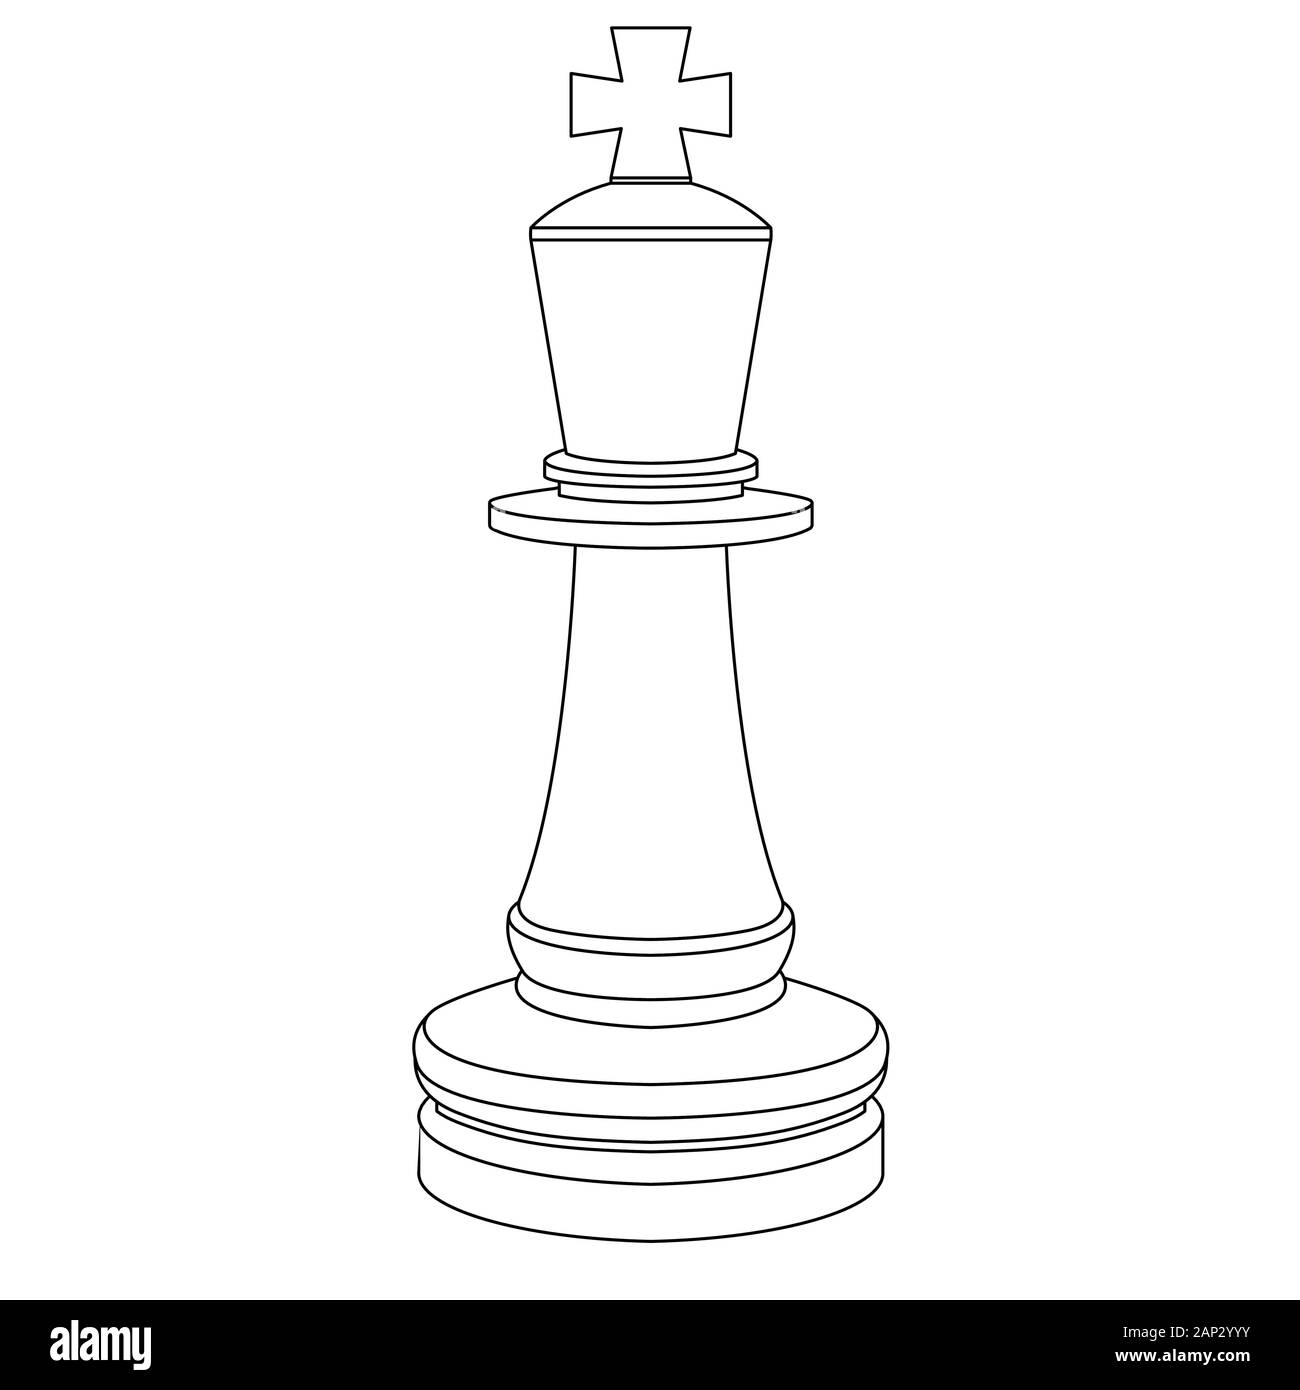 The king chess piece. Outline drawing Stock Vector